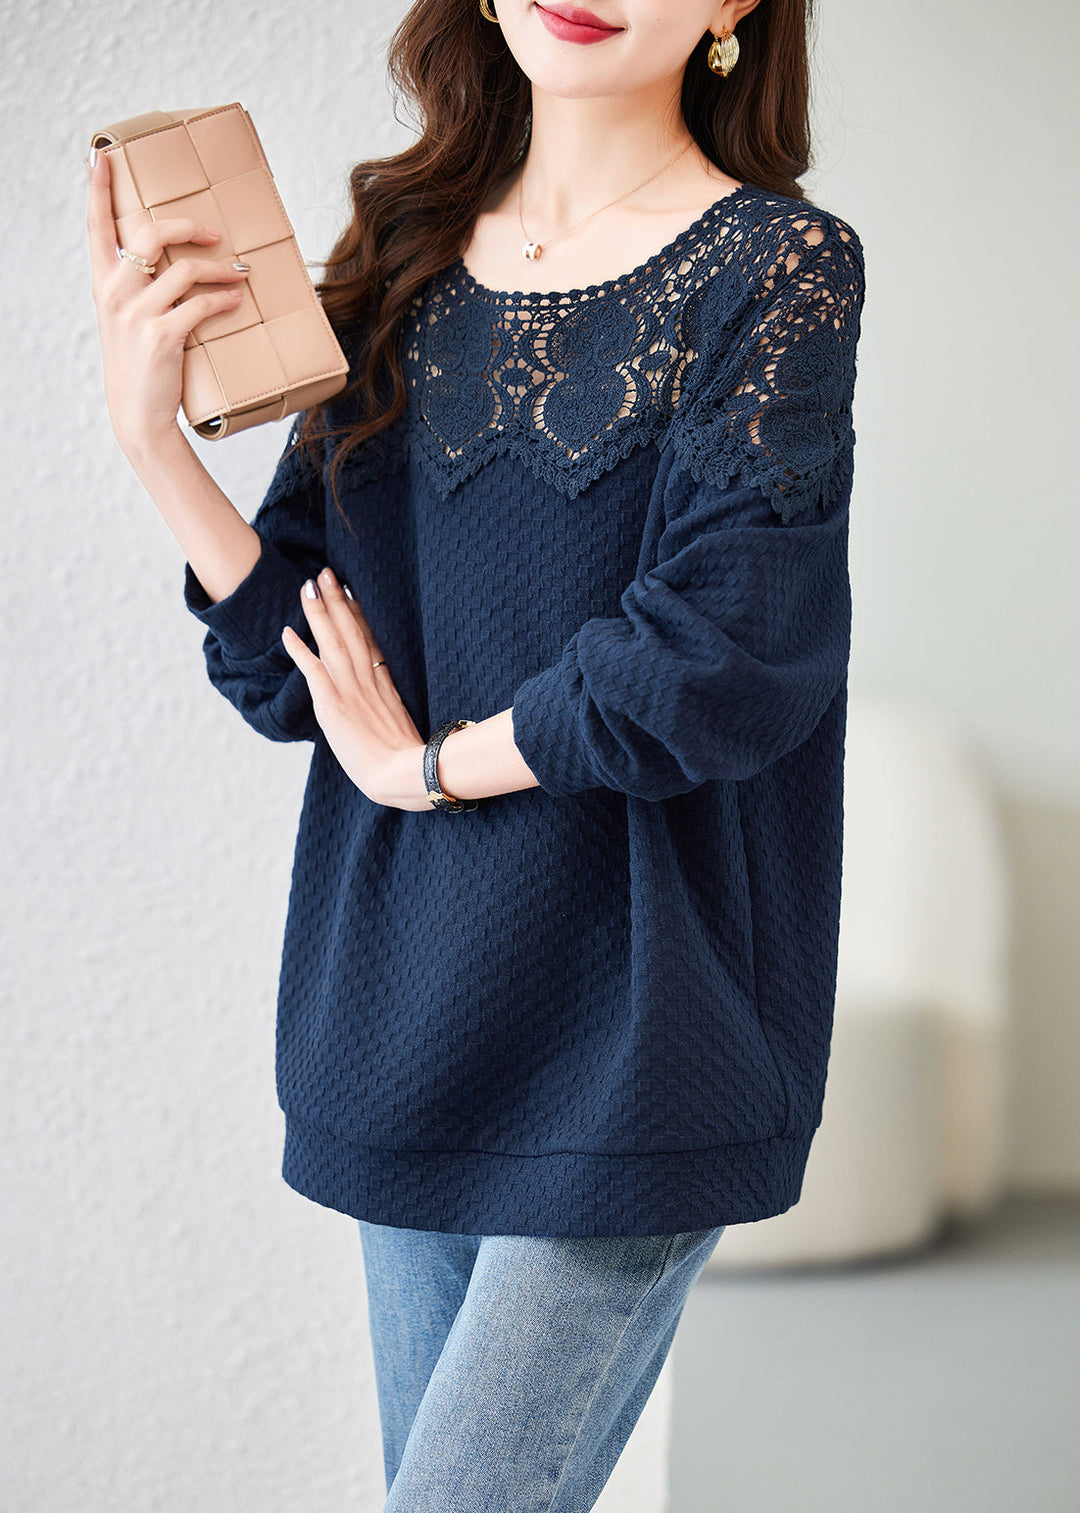 Chic Navy Embroideried Hollow Out Cotton Tops Spring